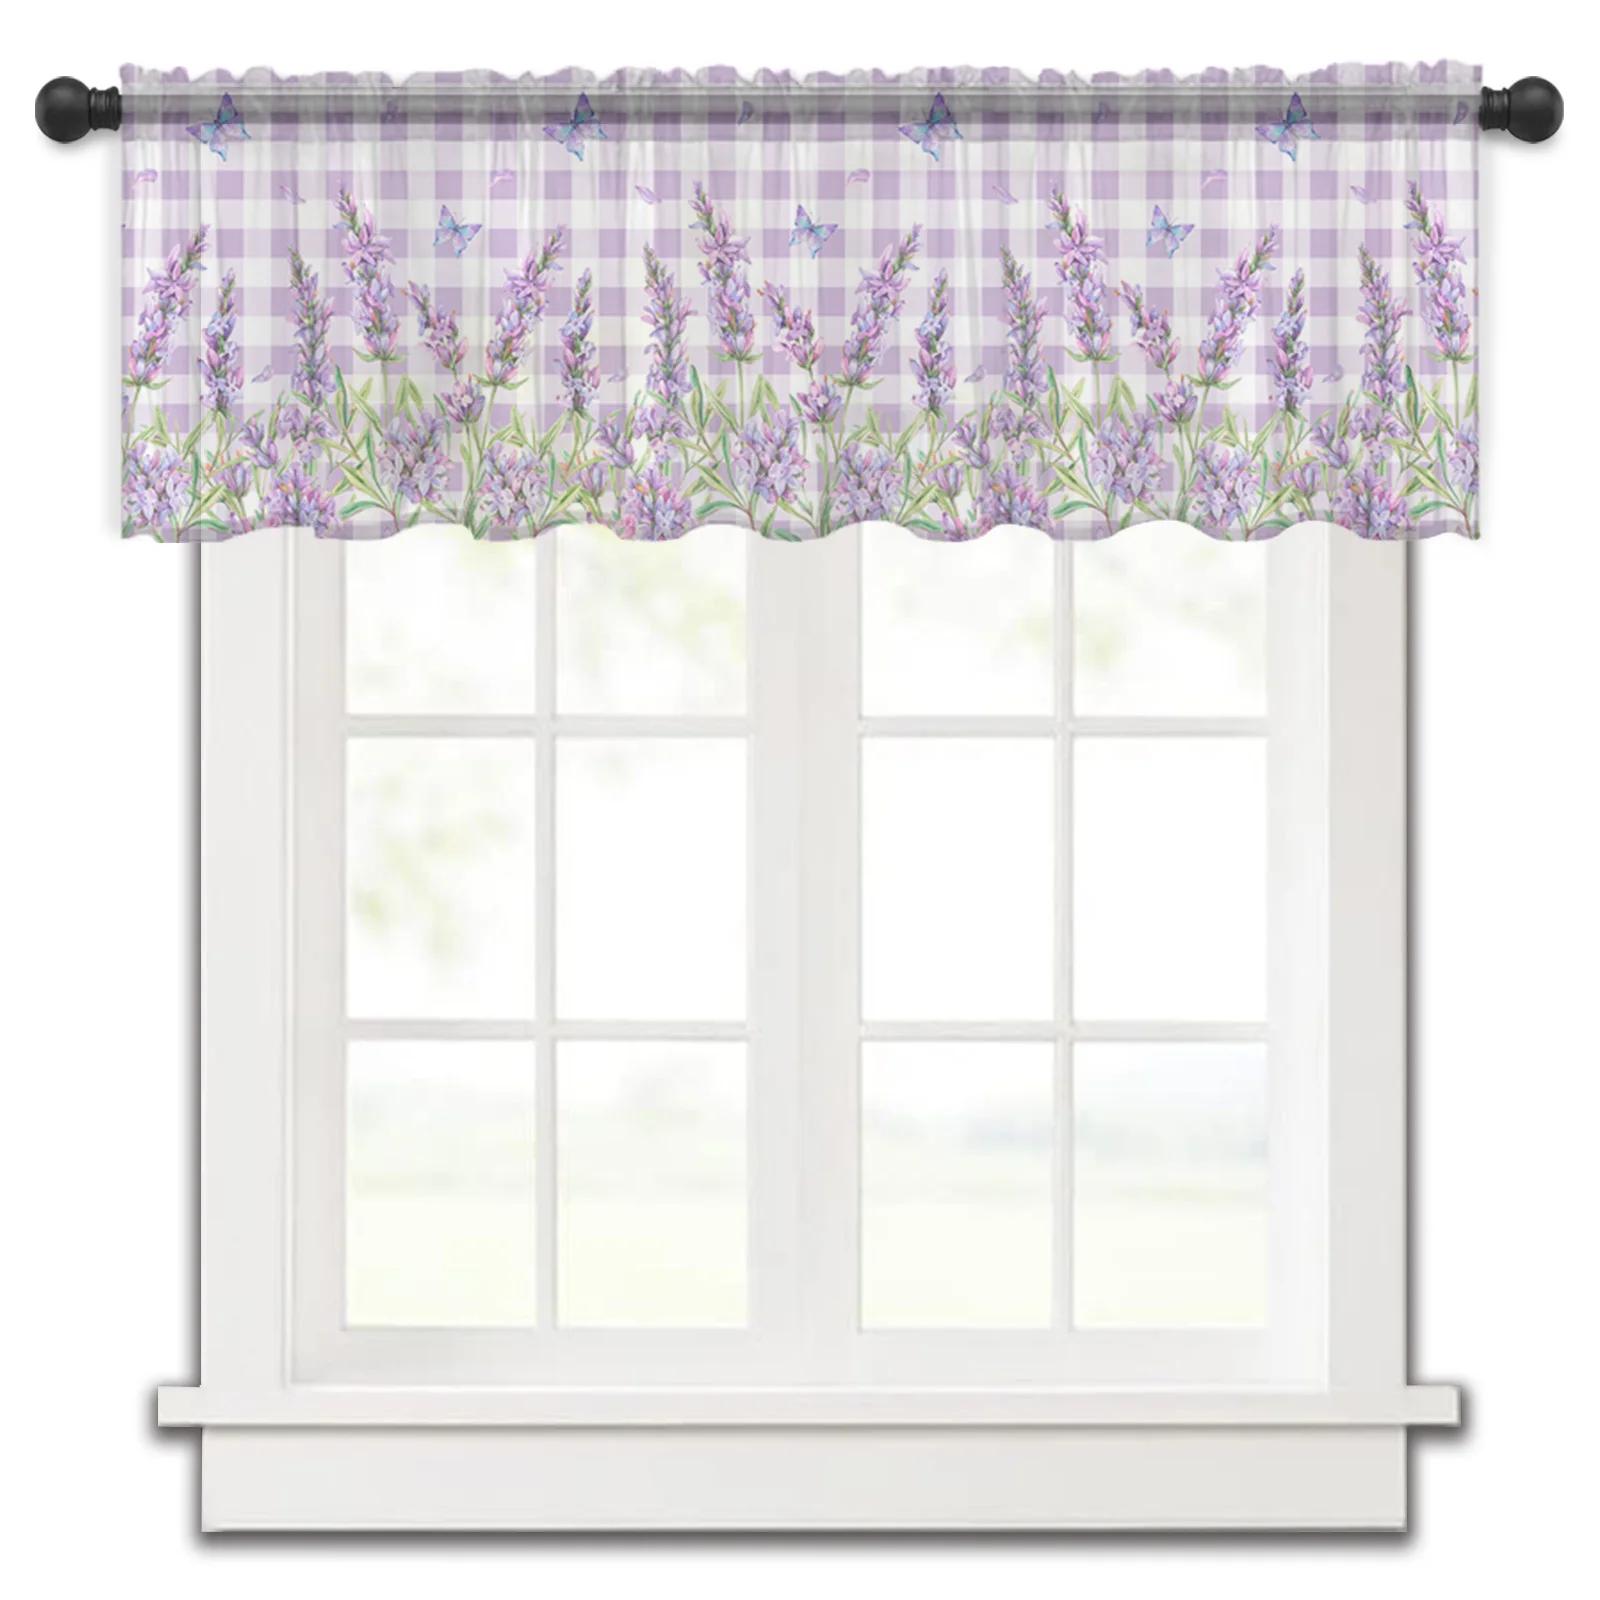 

Rustic Flower Purple Lavender Butterfly Kitchen Curtains Tulle Sheer Short Curtain Bedroom Living Room Home Decor Voile Drapes